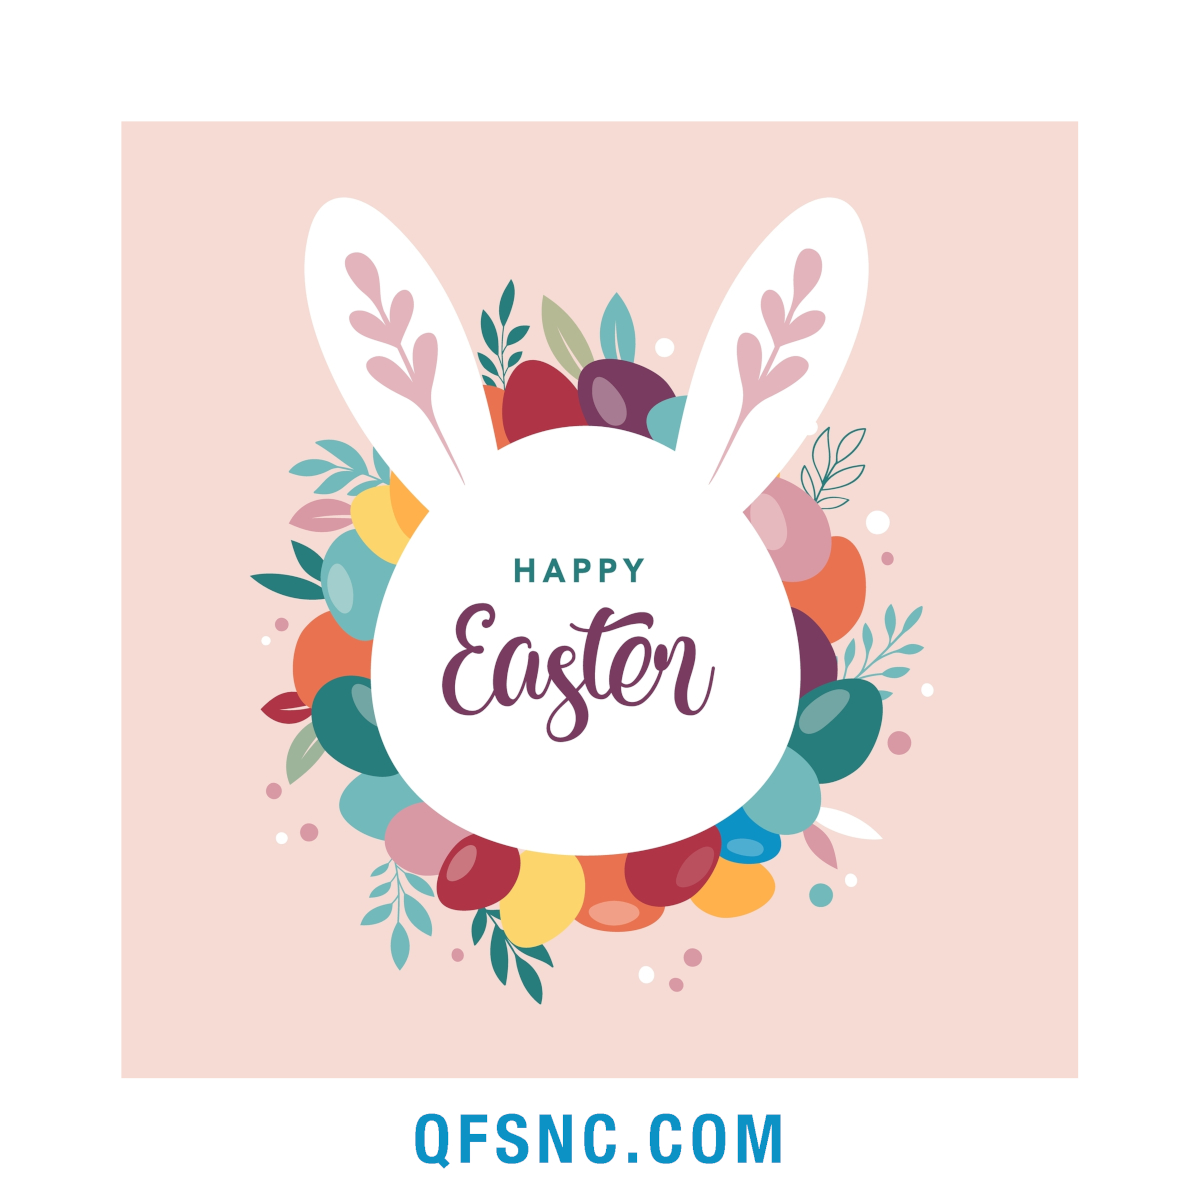 Enjoy your Easter Weekend. 😊😊😊😊😊😊😊😊😊😊 The Team At Quality Family Services #CharlotteNC #NorthCarolina